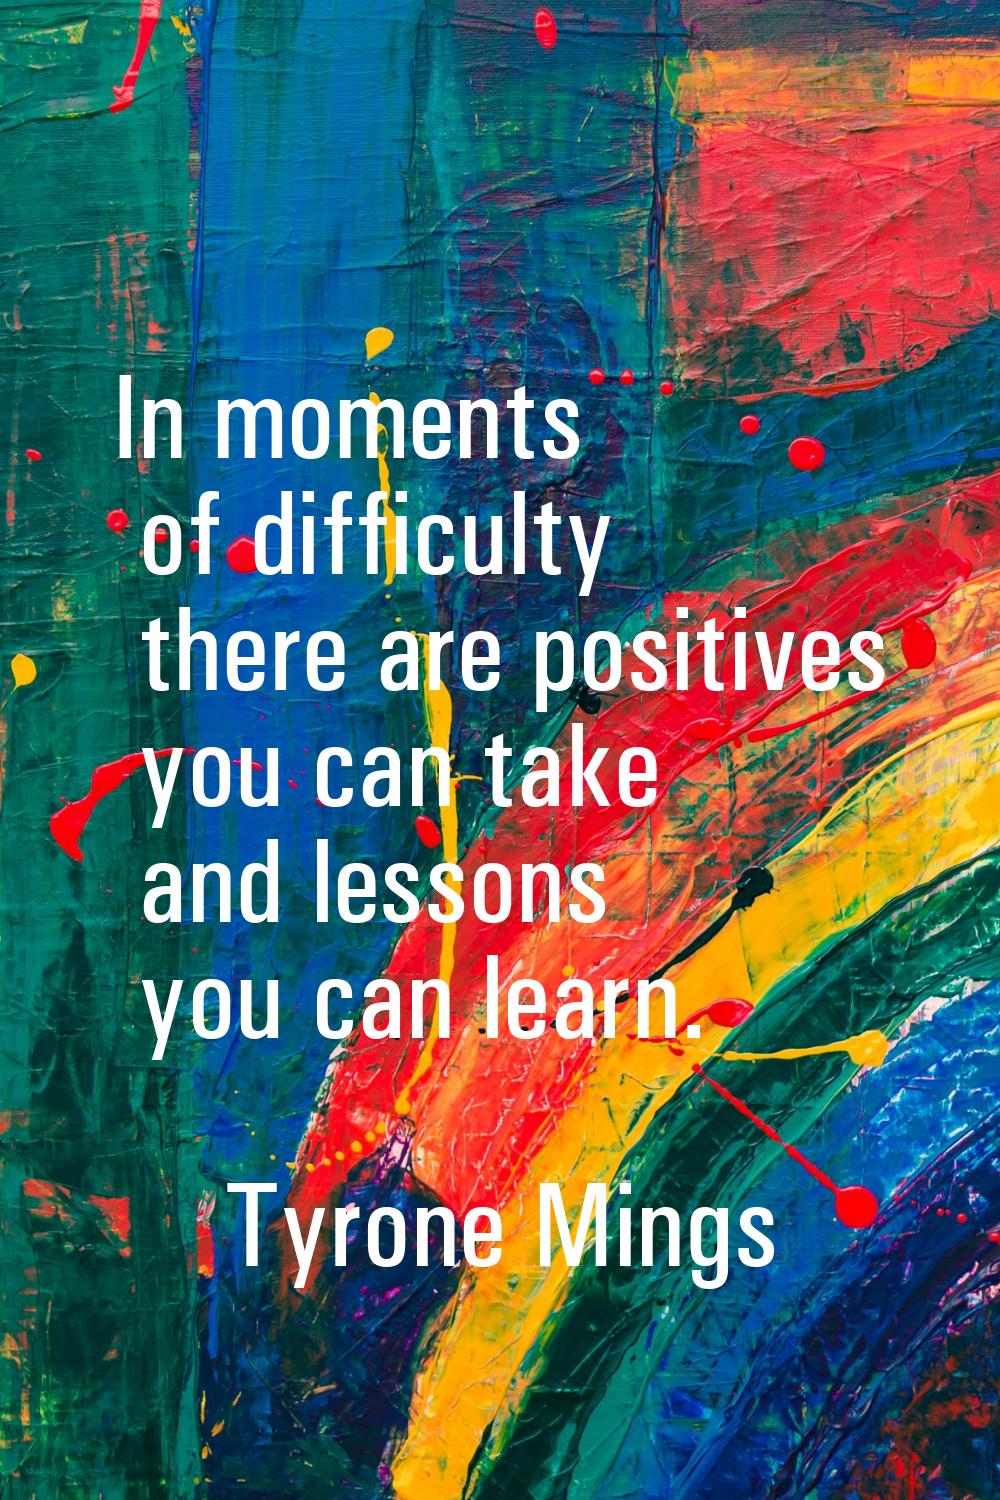 In moments of difficulty there are positives you can take and lessons you can learn.